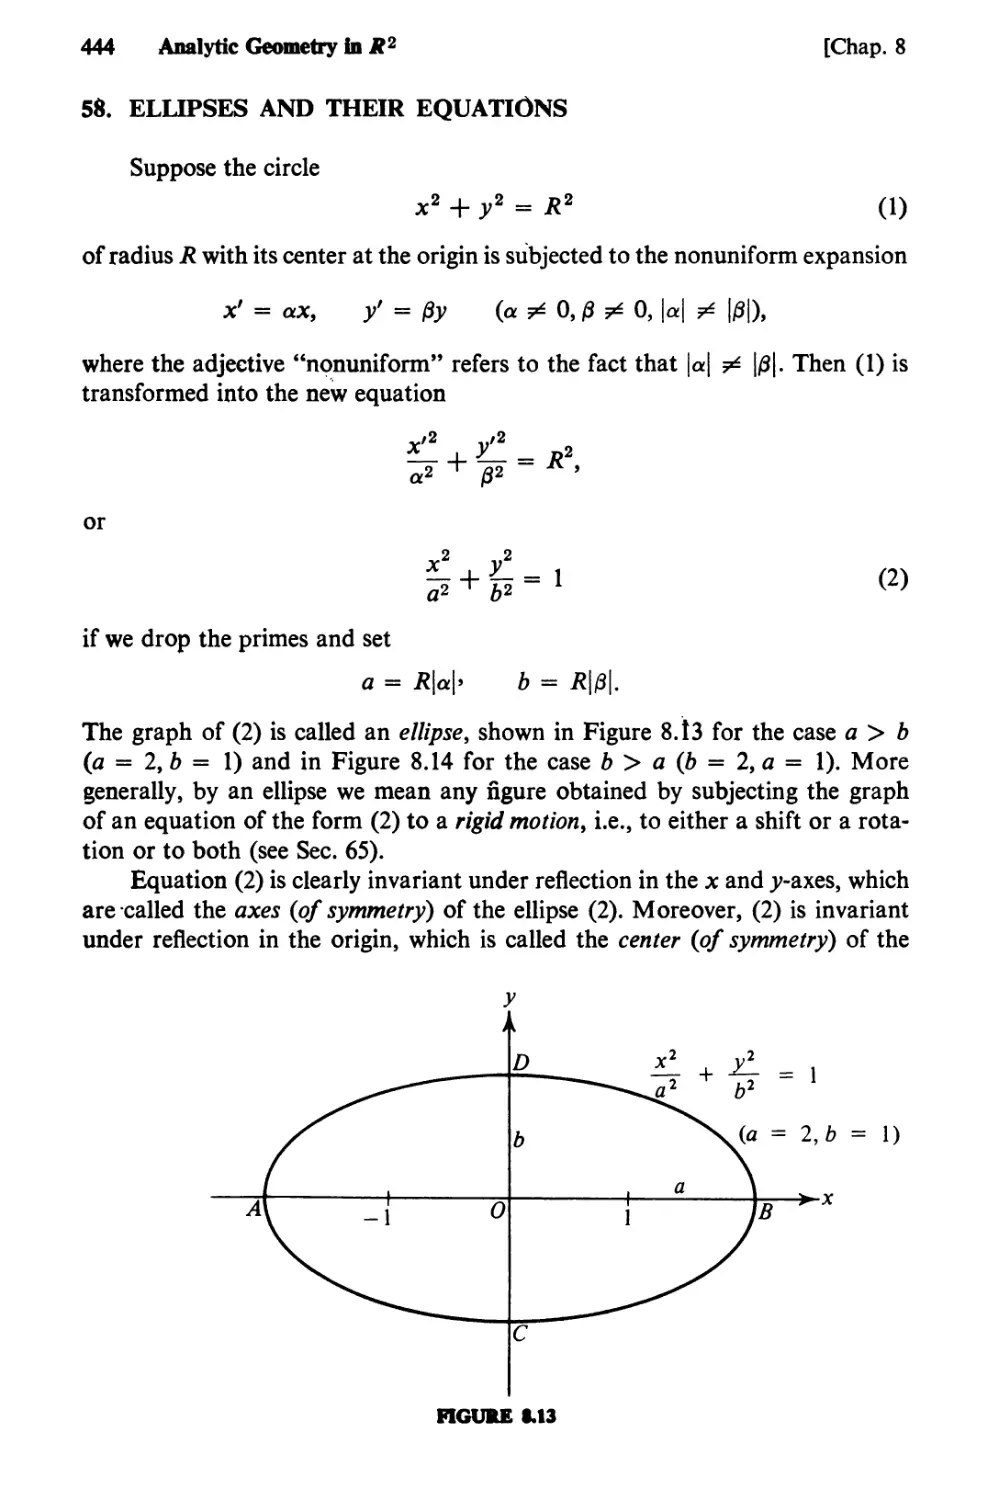 58. Ellipses and Their Equations